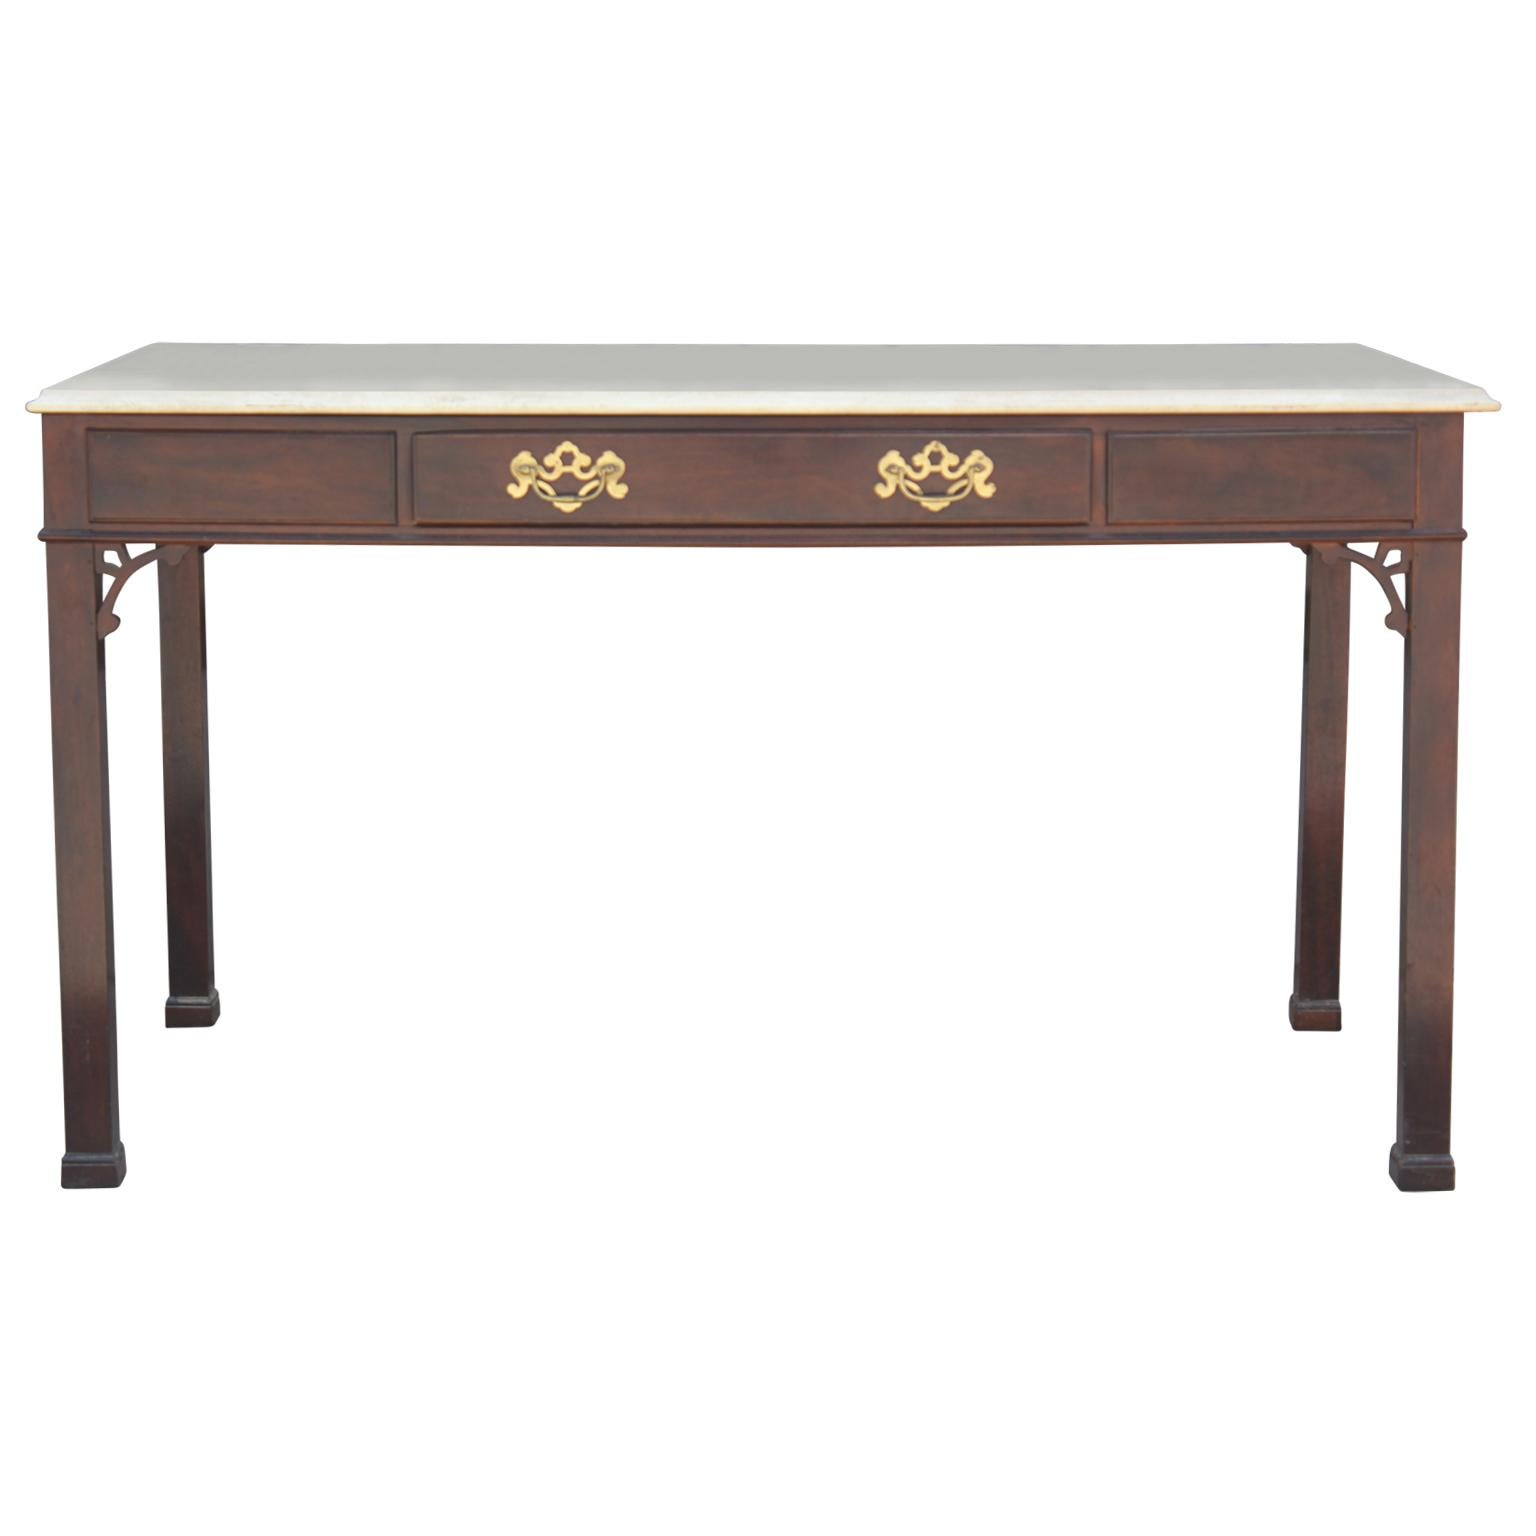 Modern Chinese Chippendale style desk with a travertine top by Henredon featuring a single drawer with brass hardware.